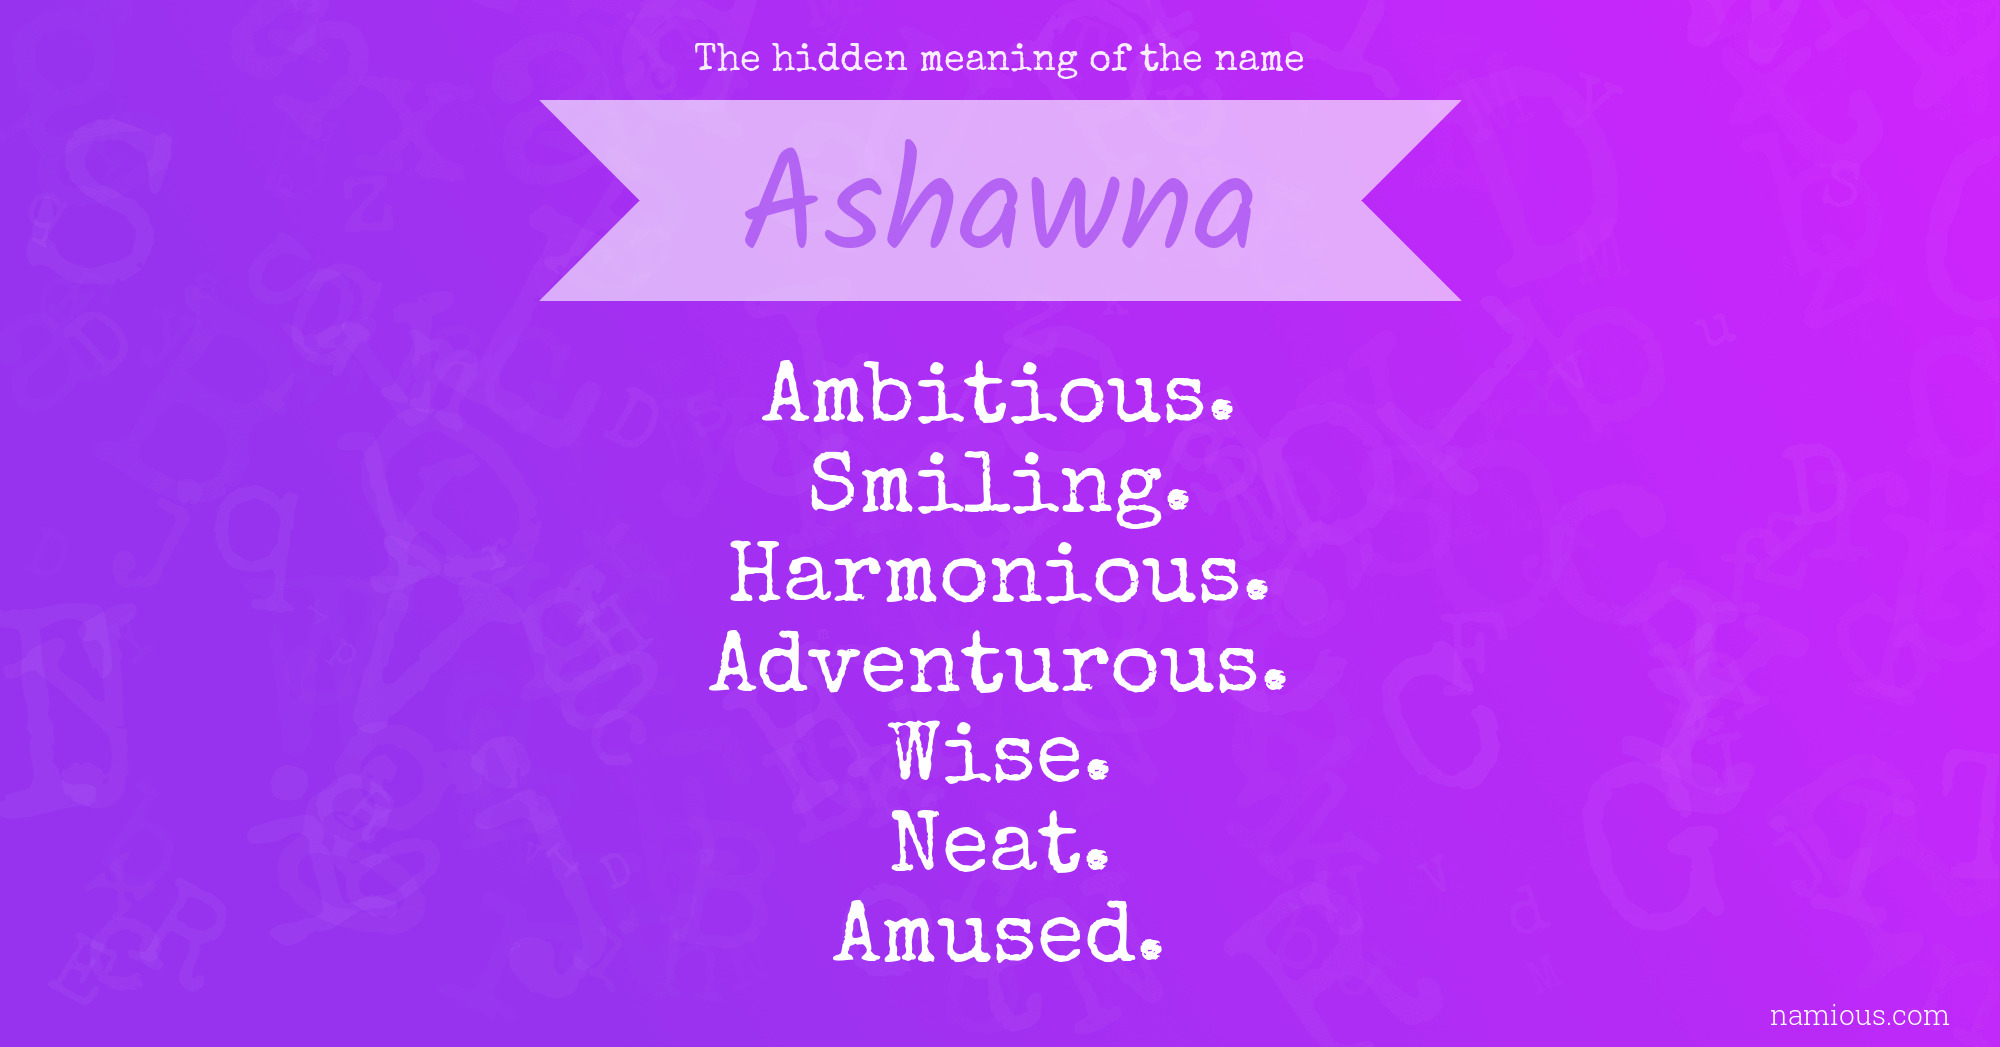 The hidden meaning of the name Ashawna